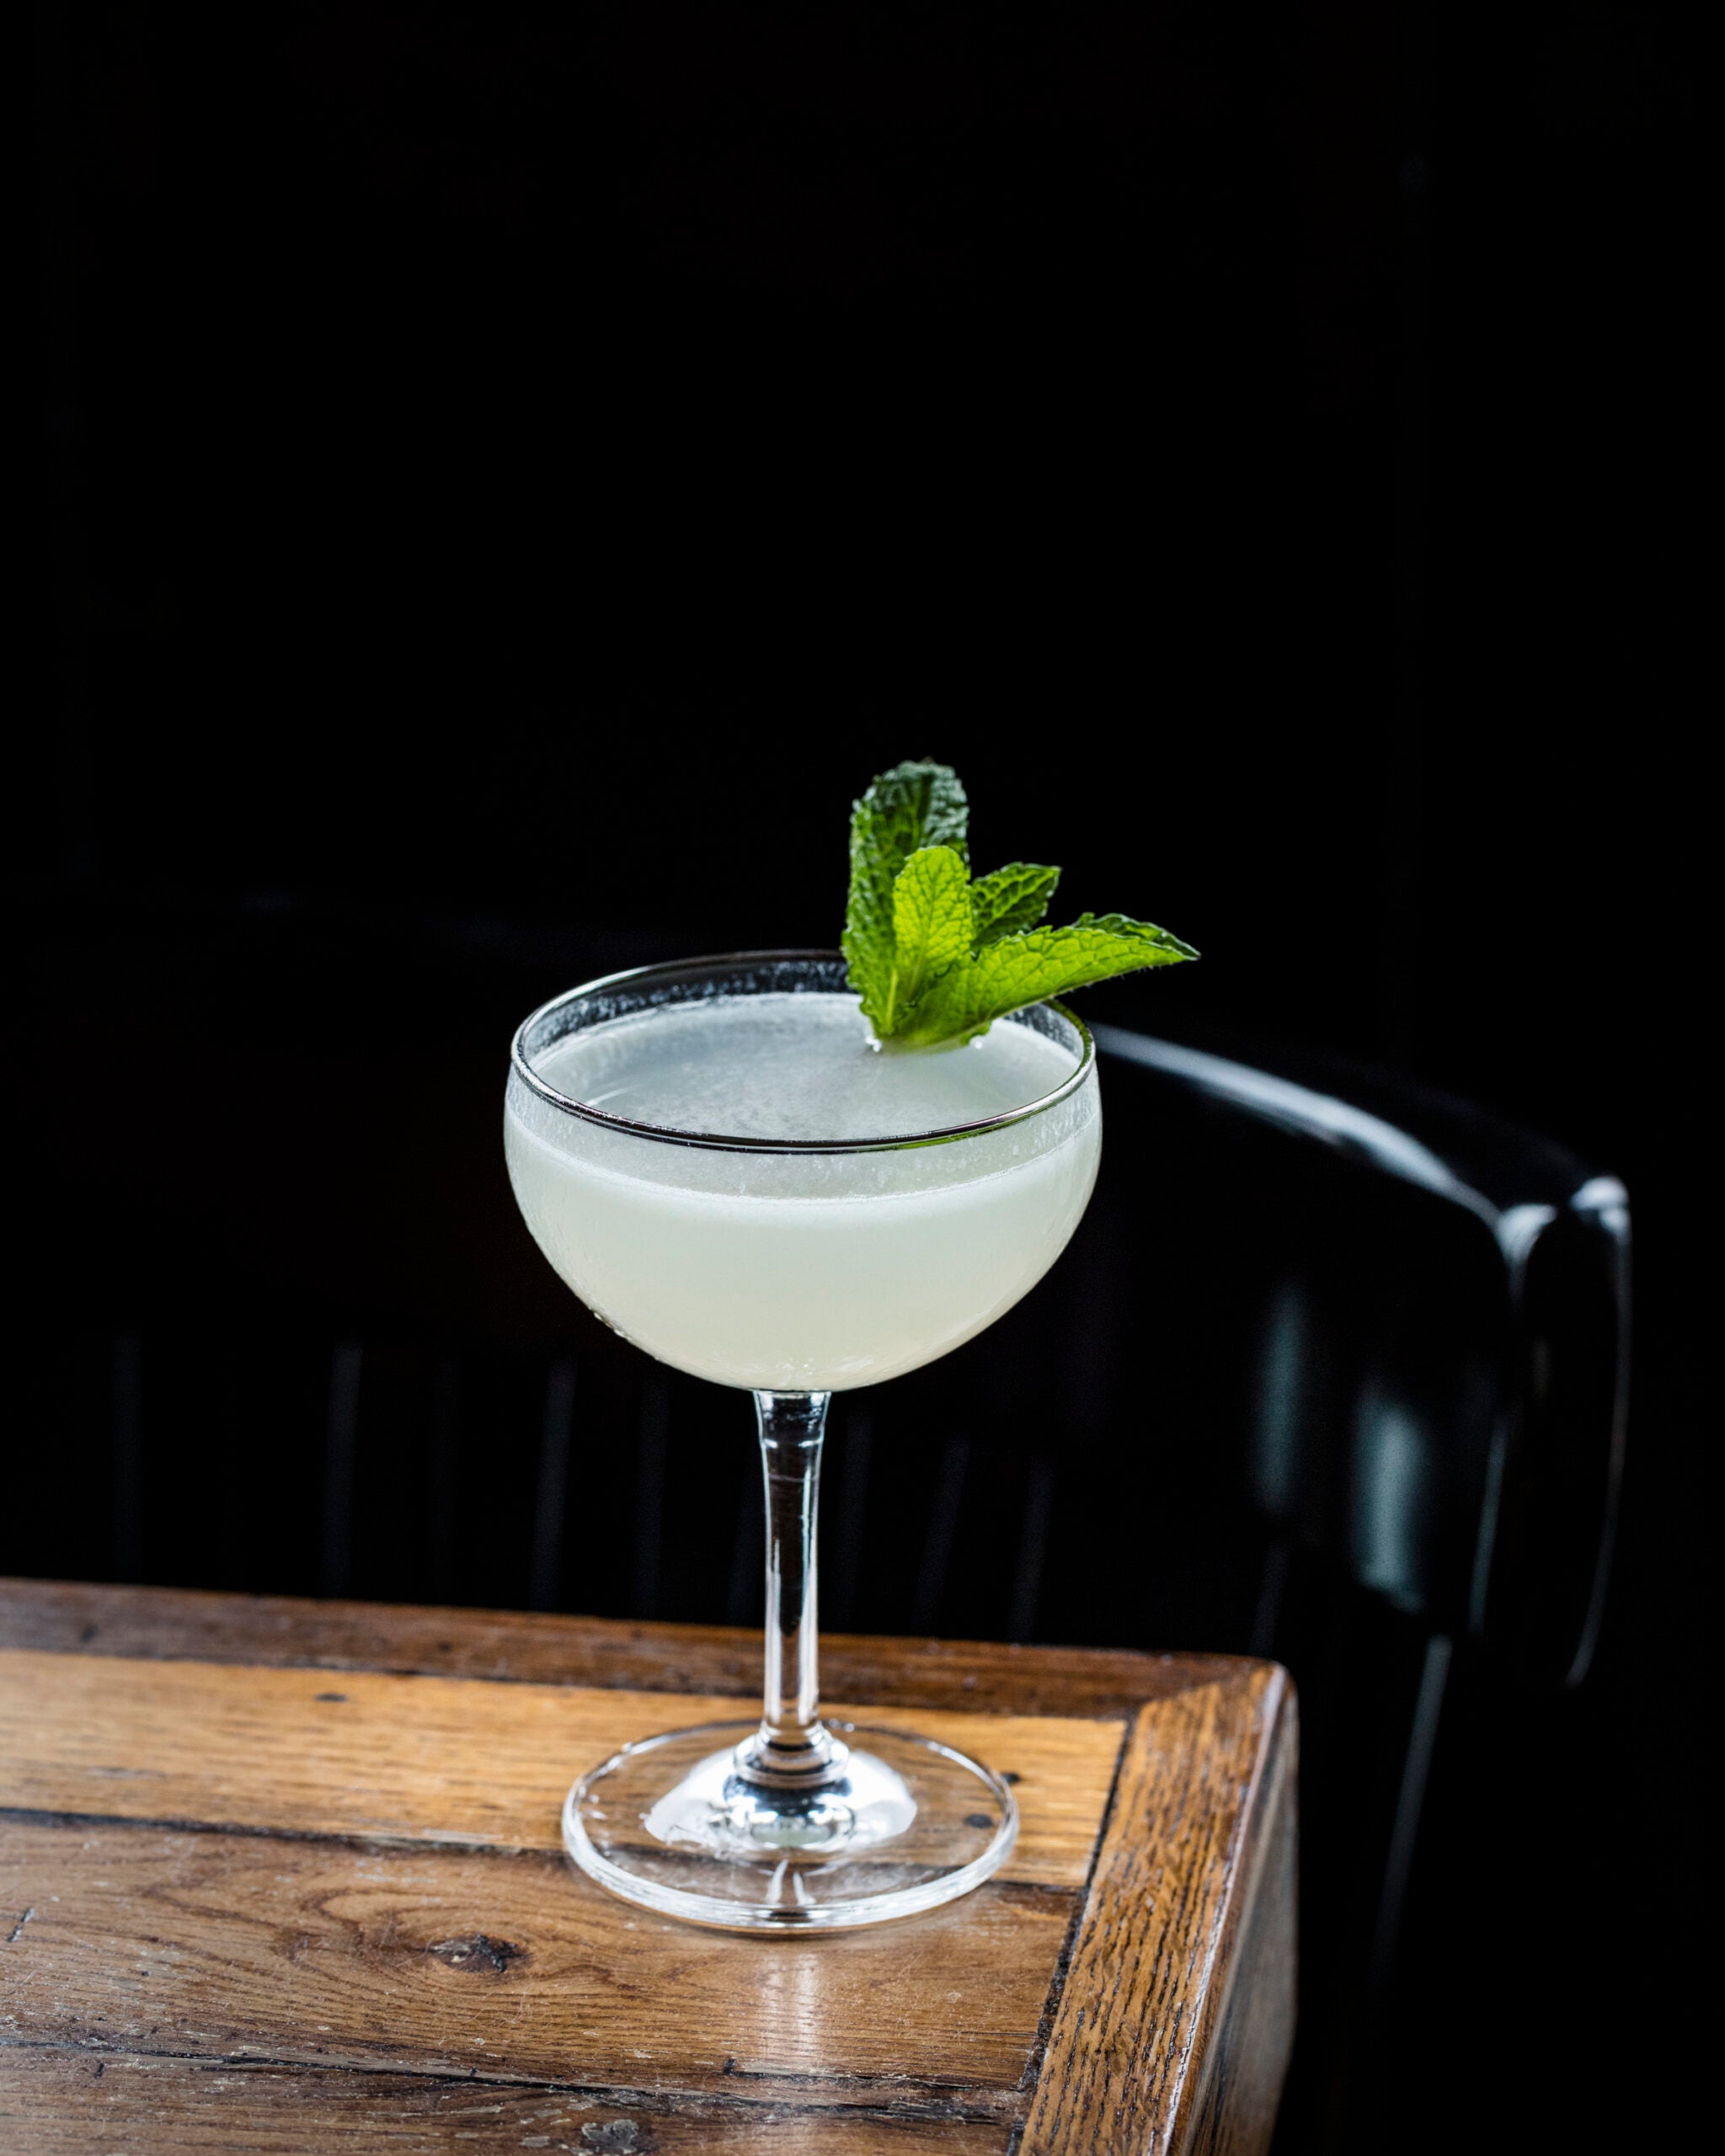 Southside cocktail with mint sprig